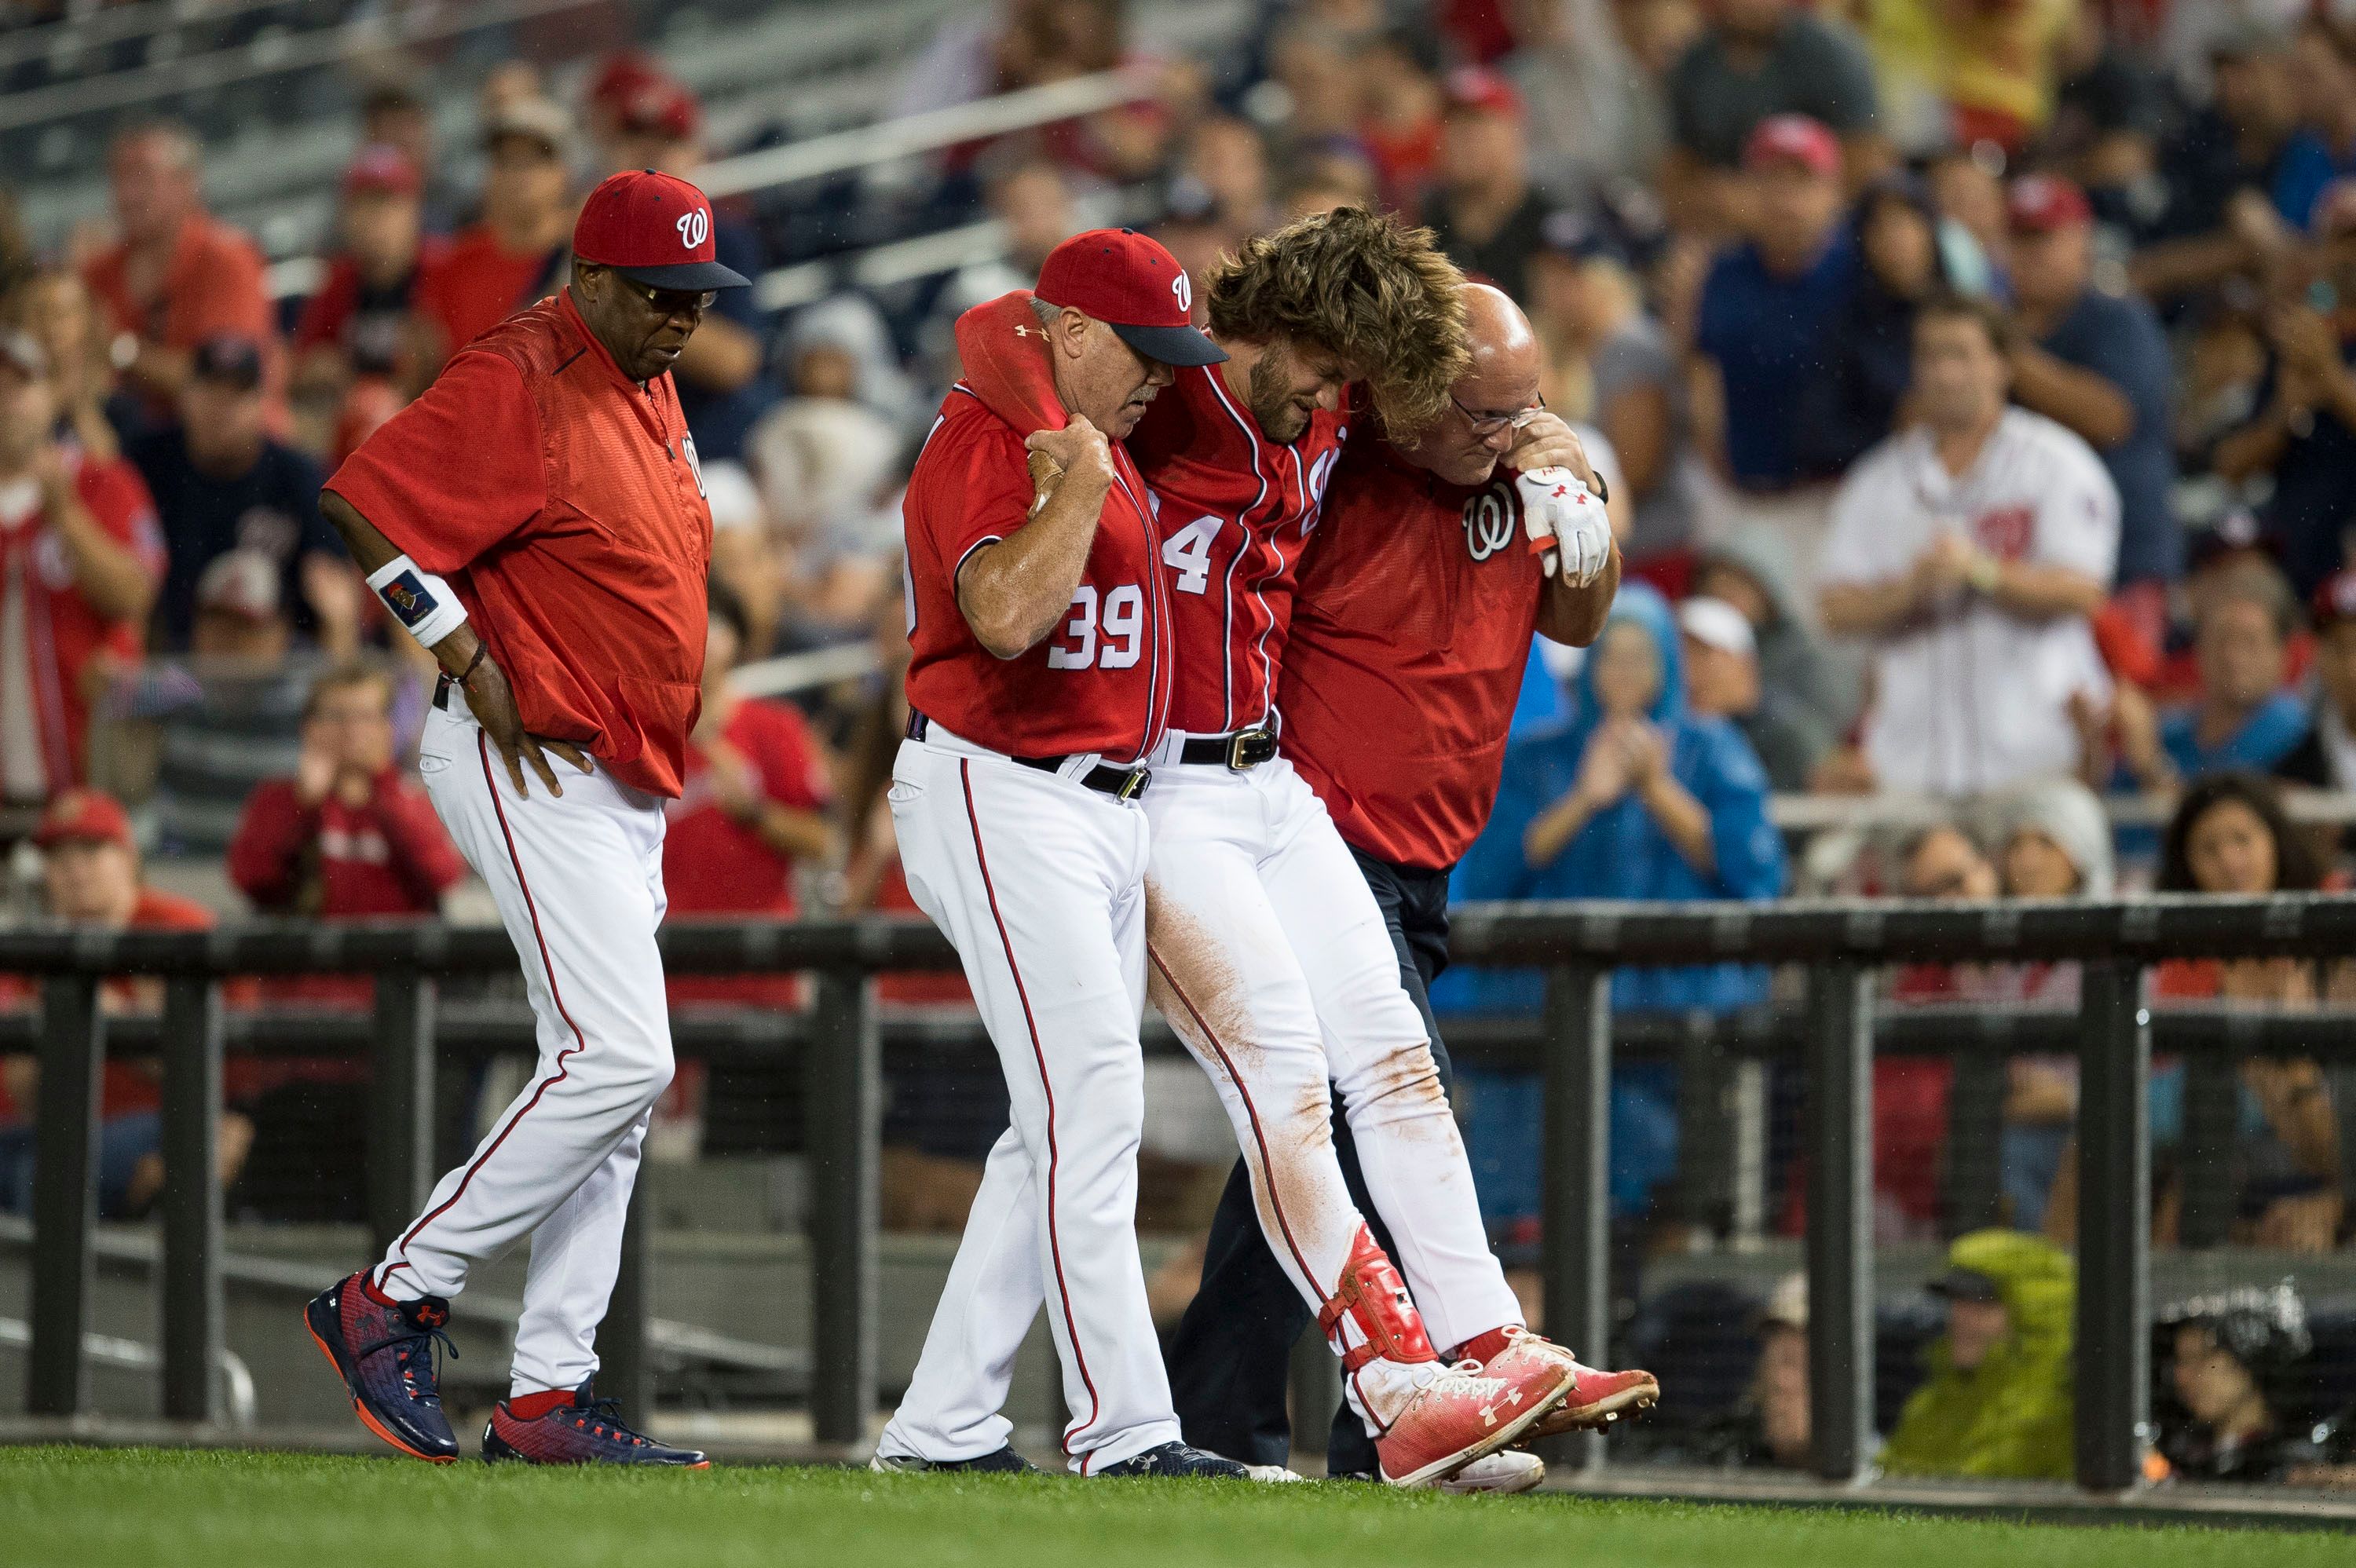 Bryce Harper injury update: Harper suffered significant bone bruise in left  knee; “We feel we dodged a bullet.” - Nationals' GM Mike Rizzo - Federal  Baseball